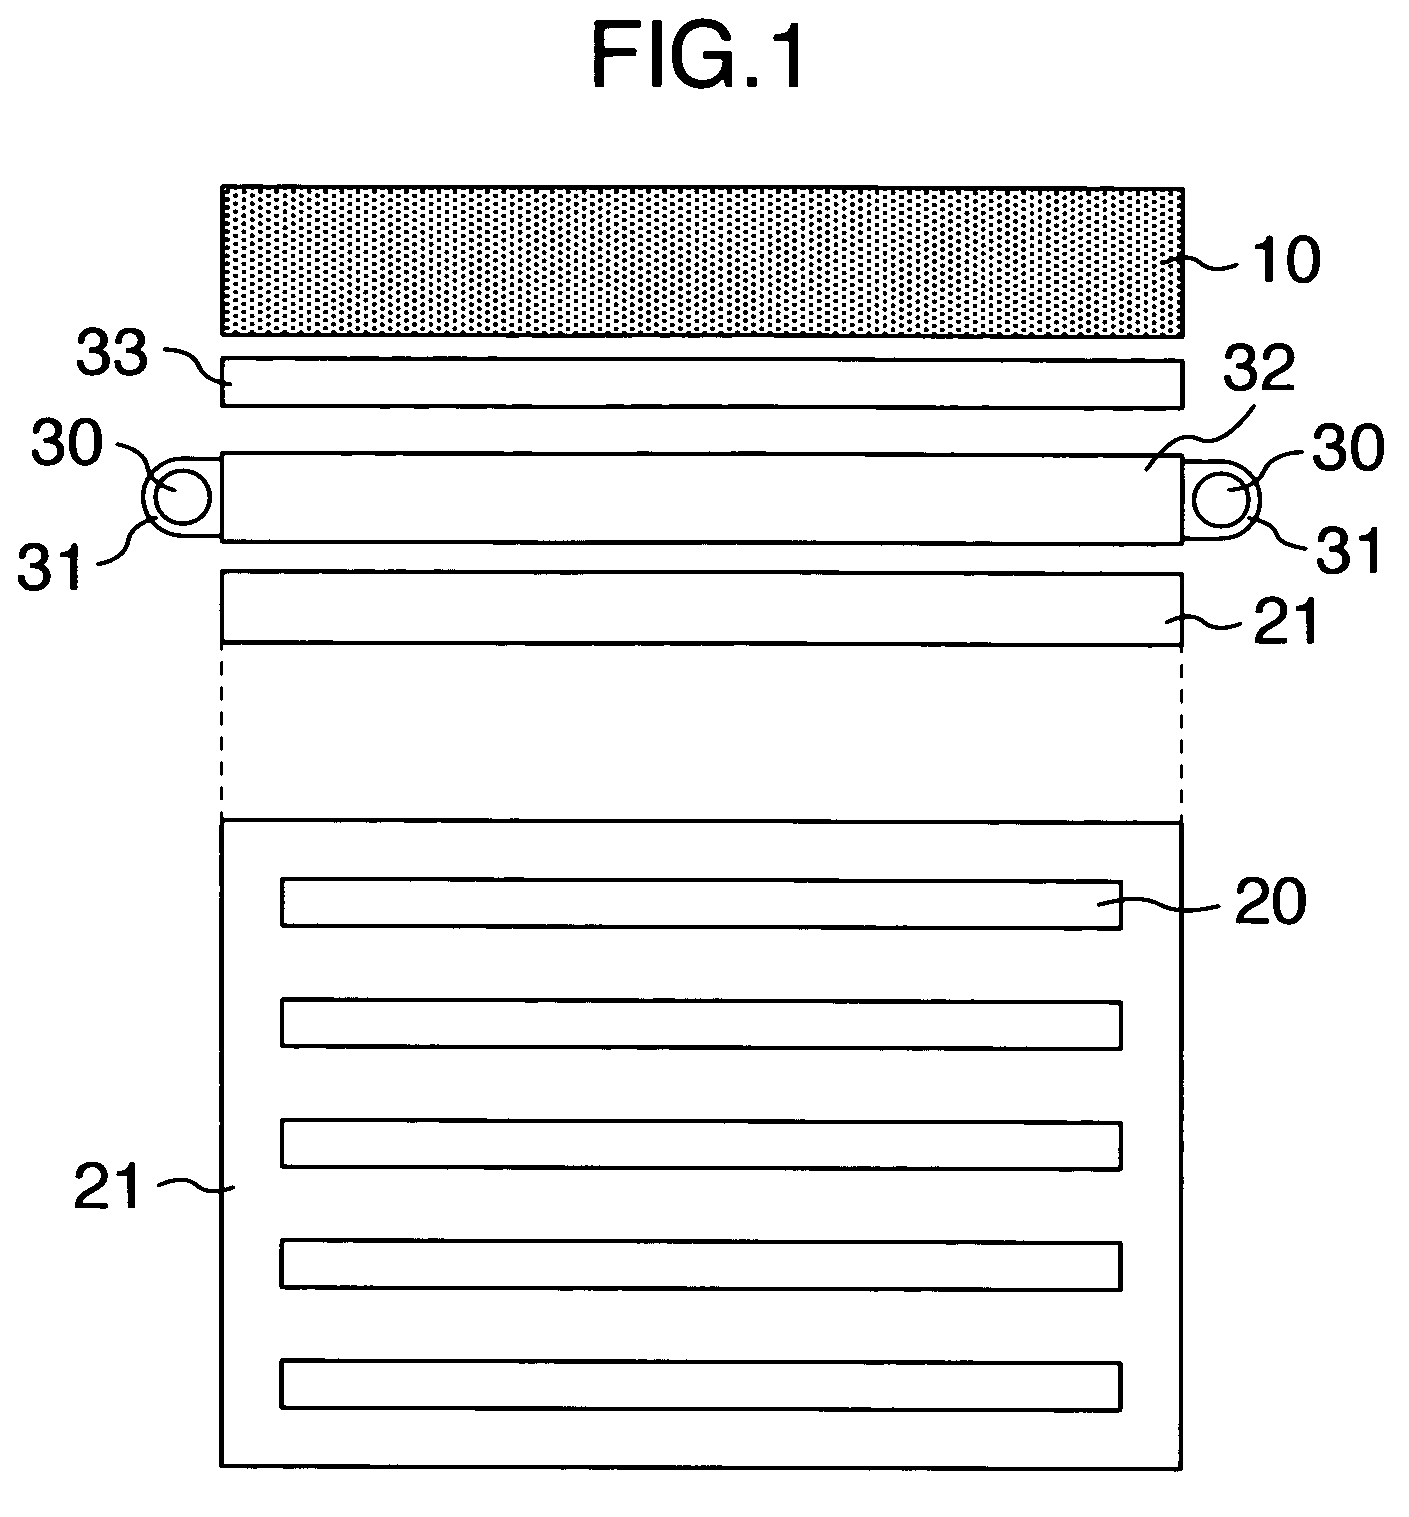 Liquid crystal display apparatus capable of maintaining high color purity